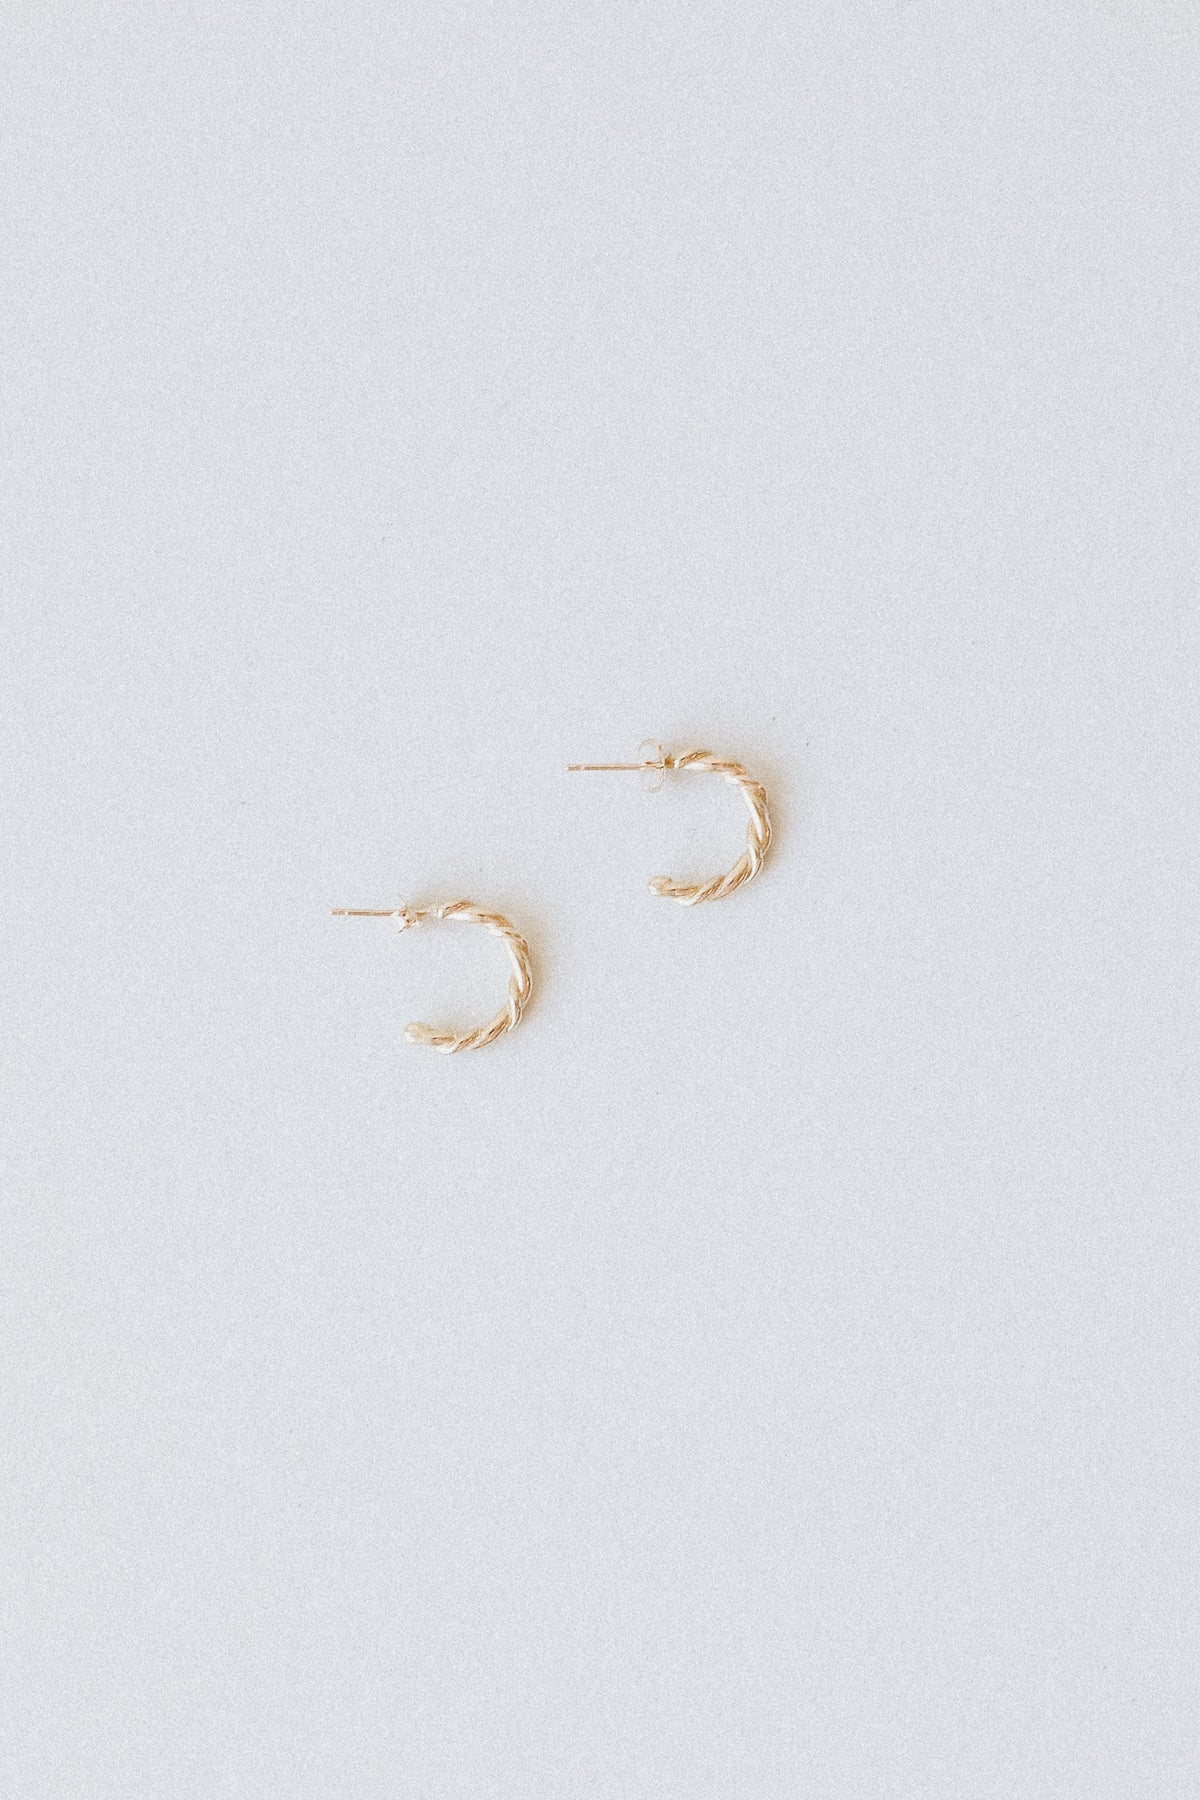 SMALL ROPE HOOPS IN 14K GOLD